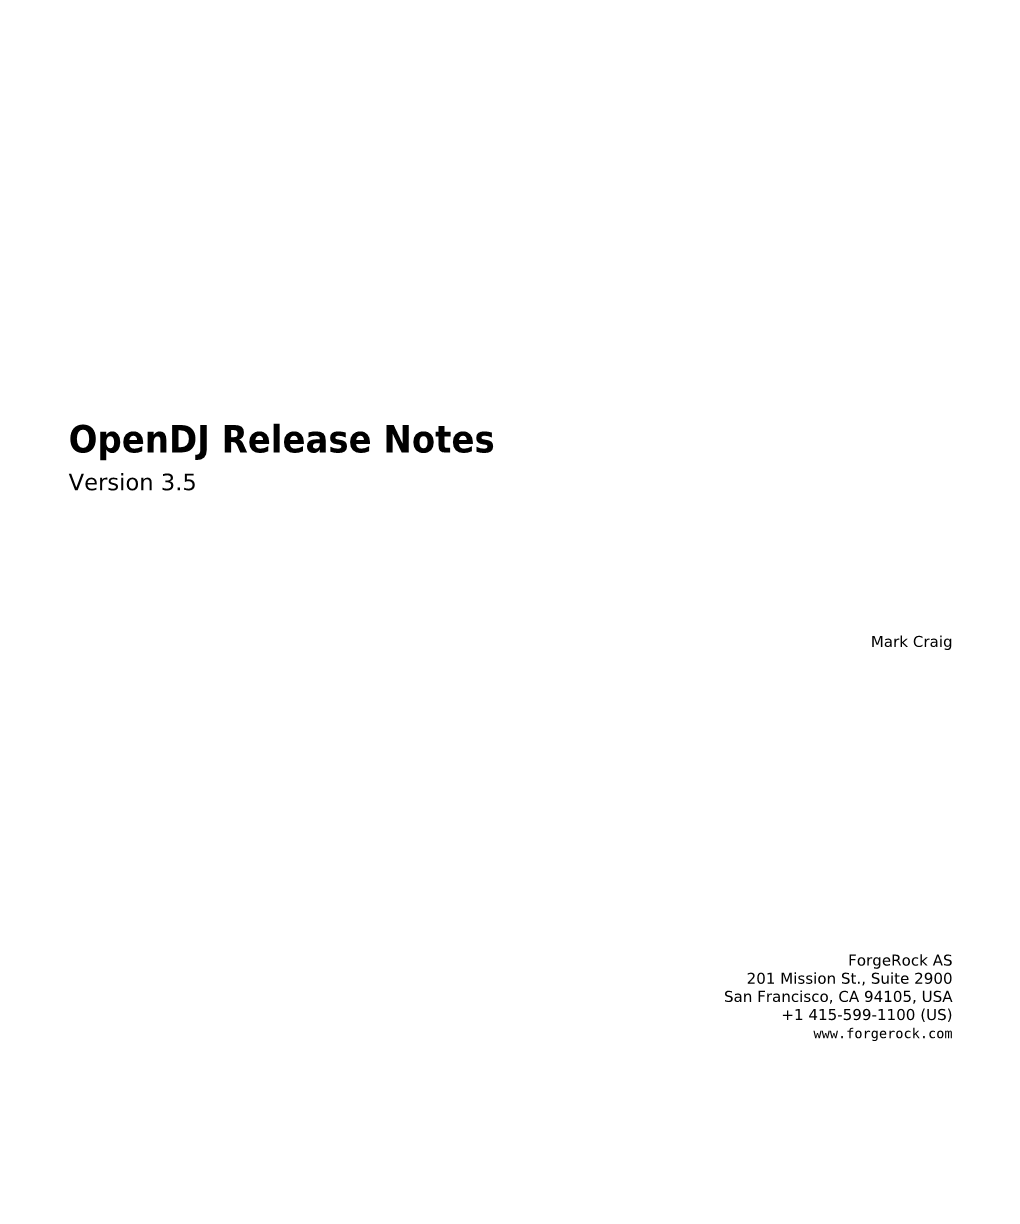 Opendj Release Notes Version 3.5